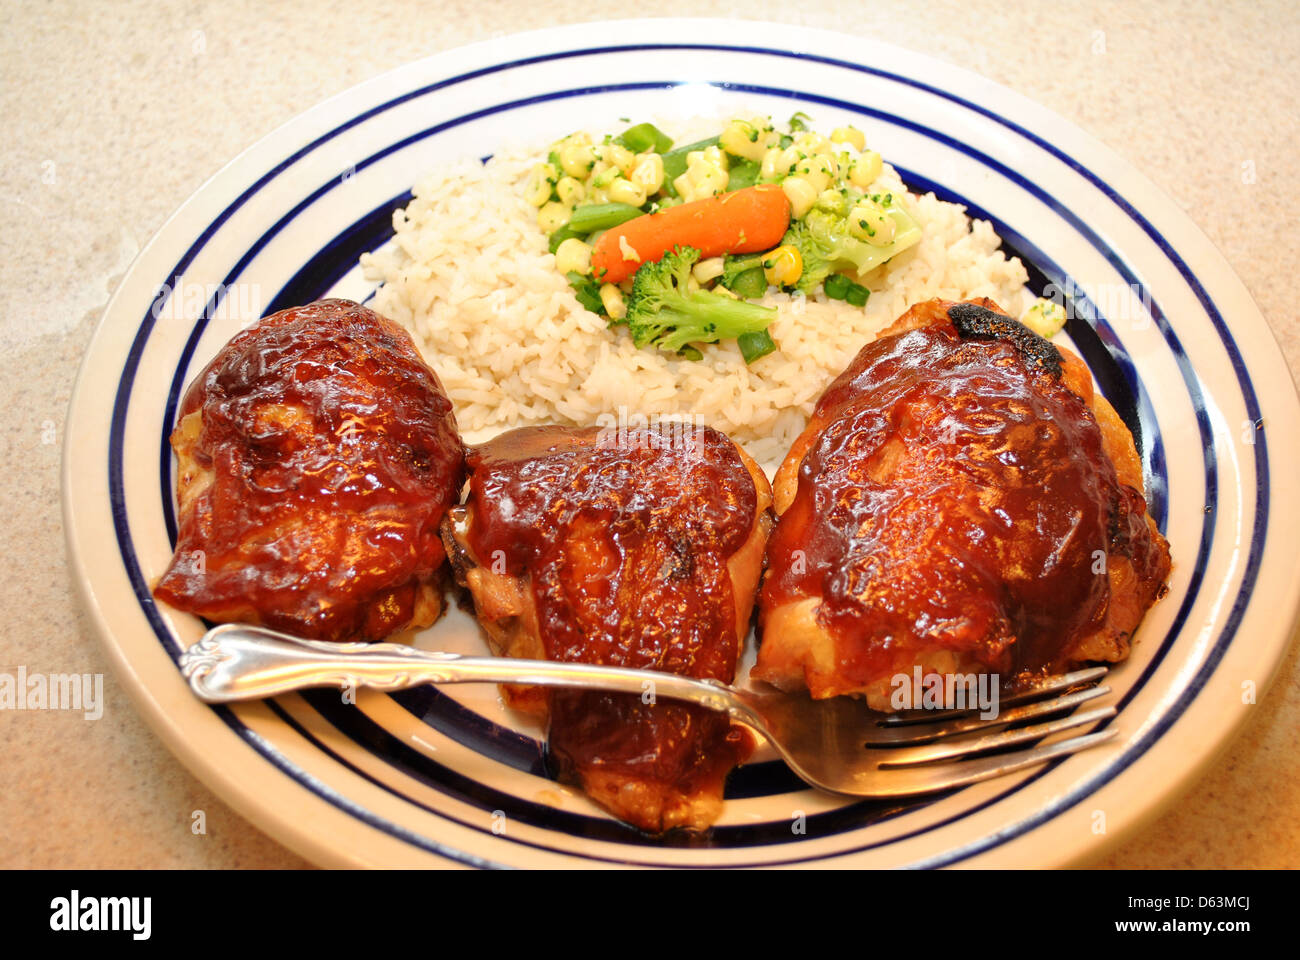 Barbeque Chicken with Rice Stock Photo